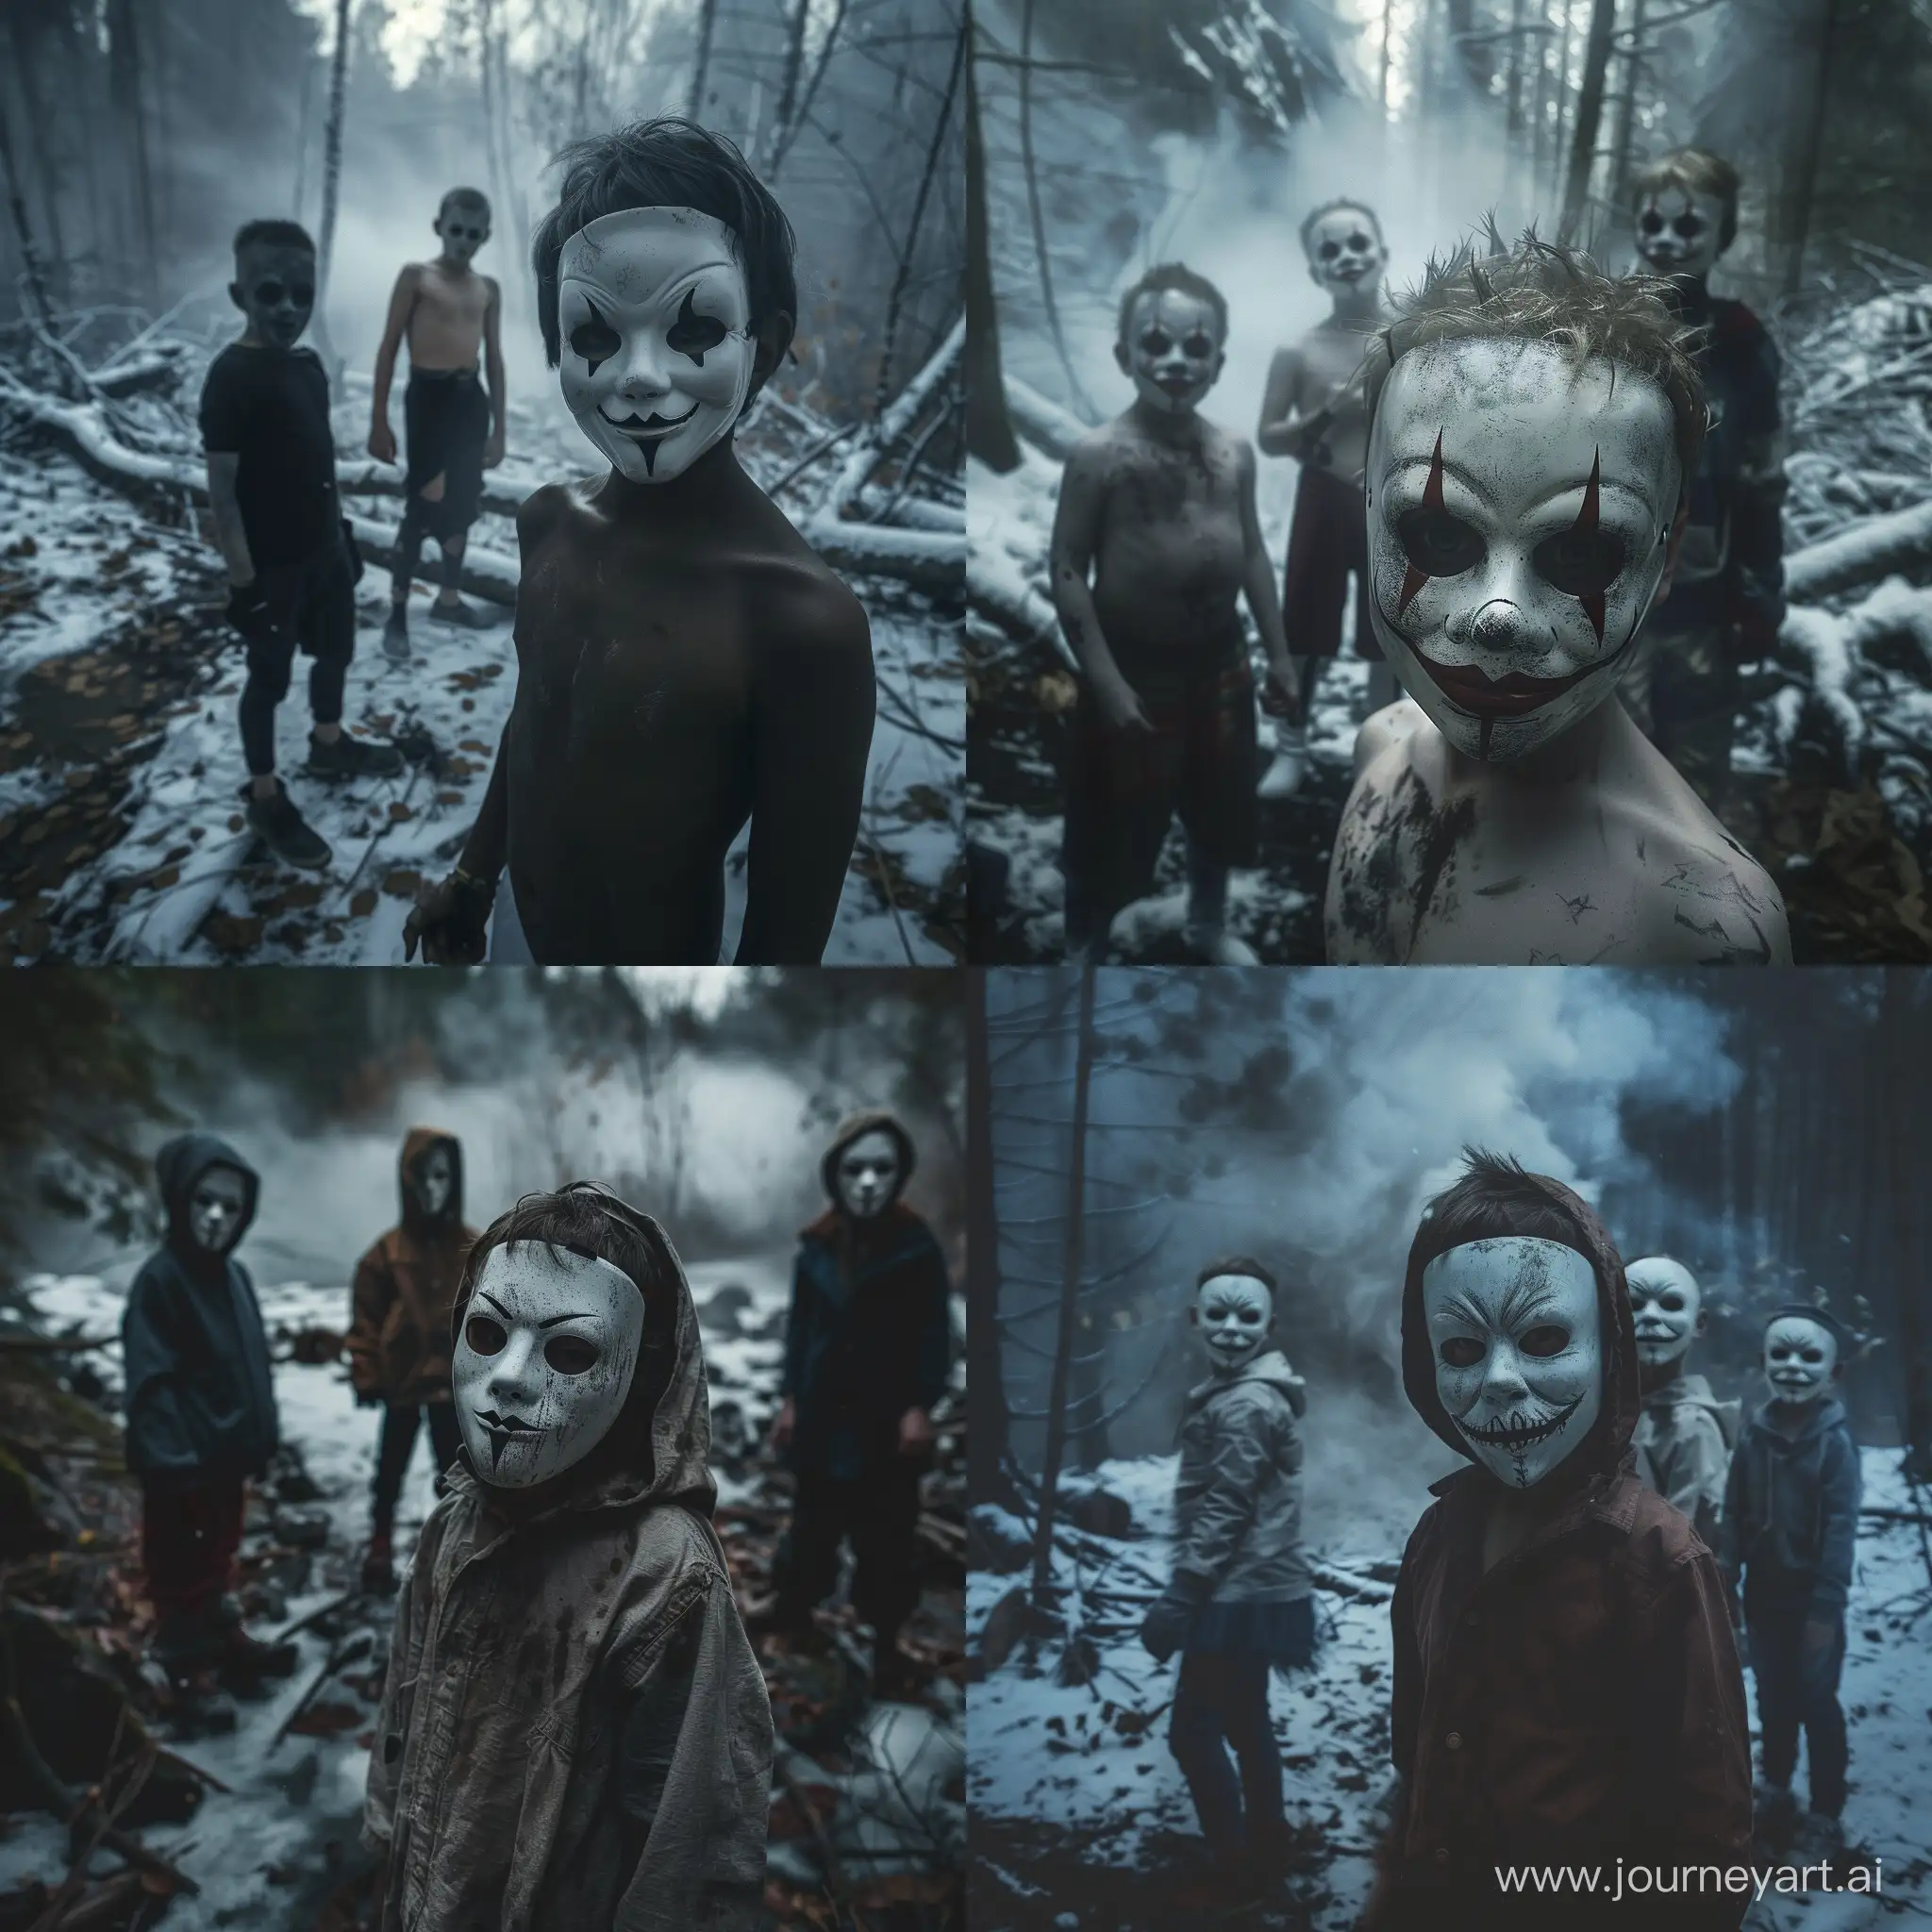 Creepy-Children-in-Snowy-Forest-Haunting-Realistic-Photography